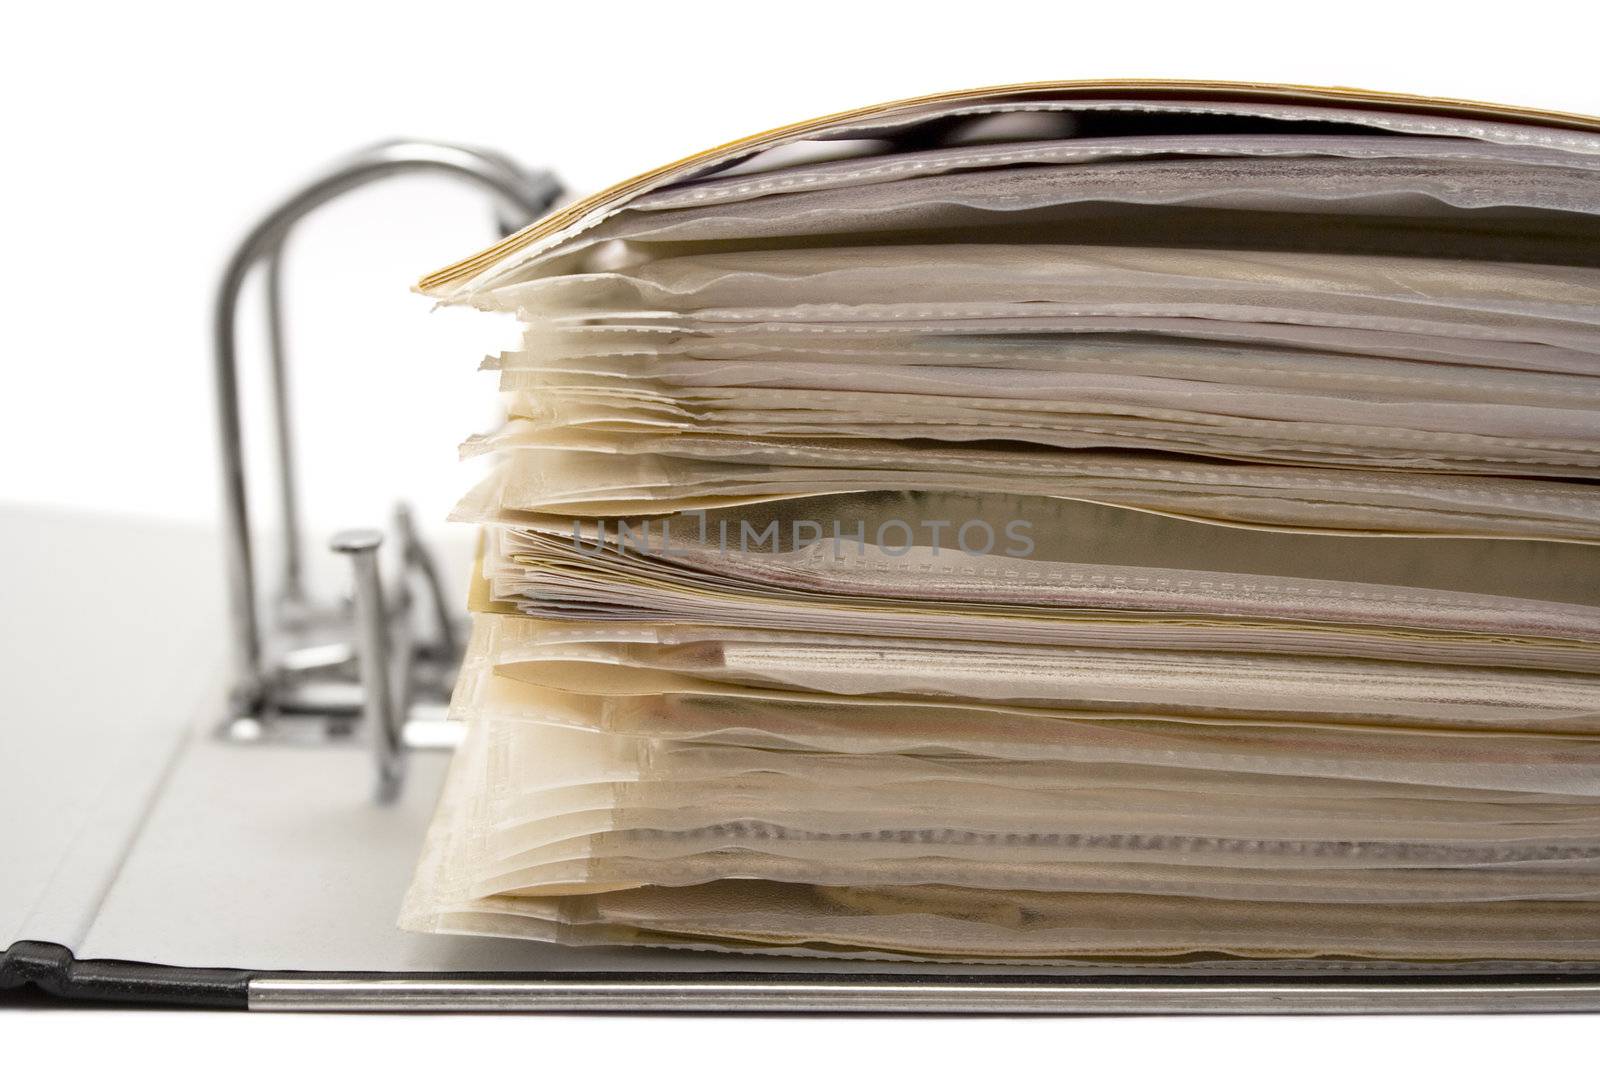 Open ring binder full of documents isolated on a white background.